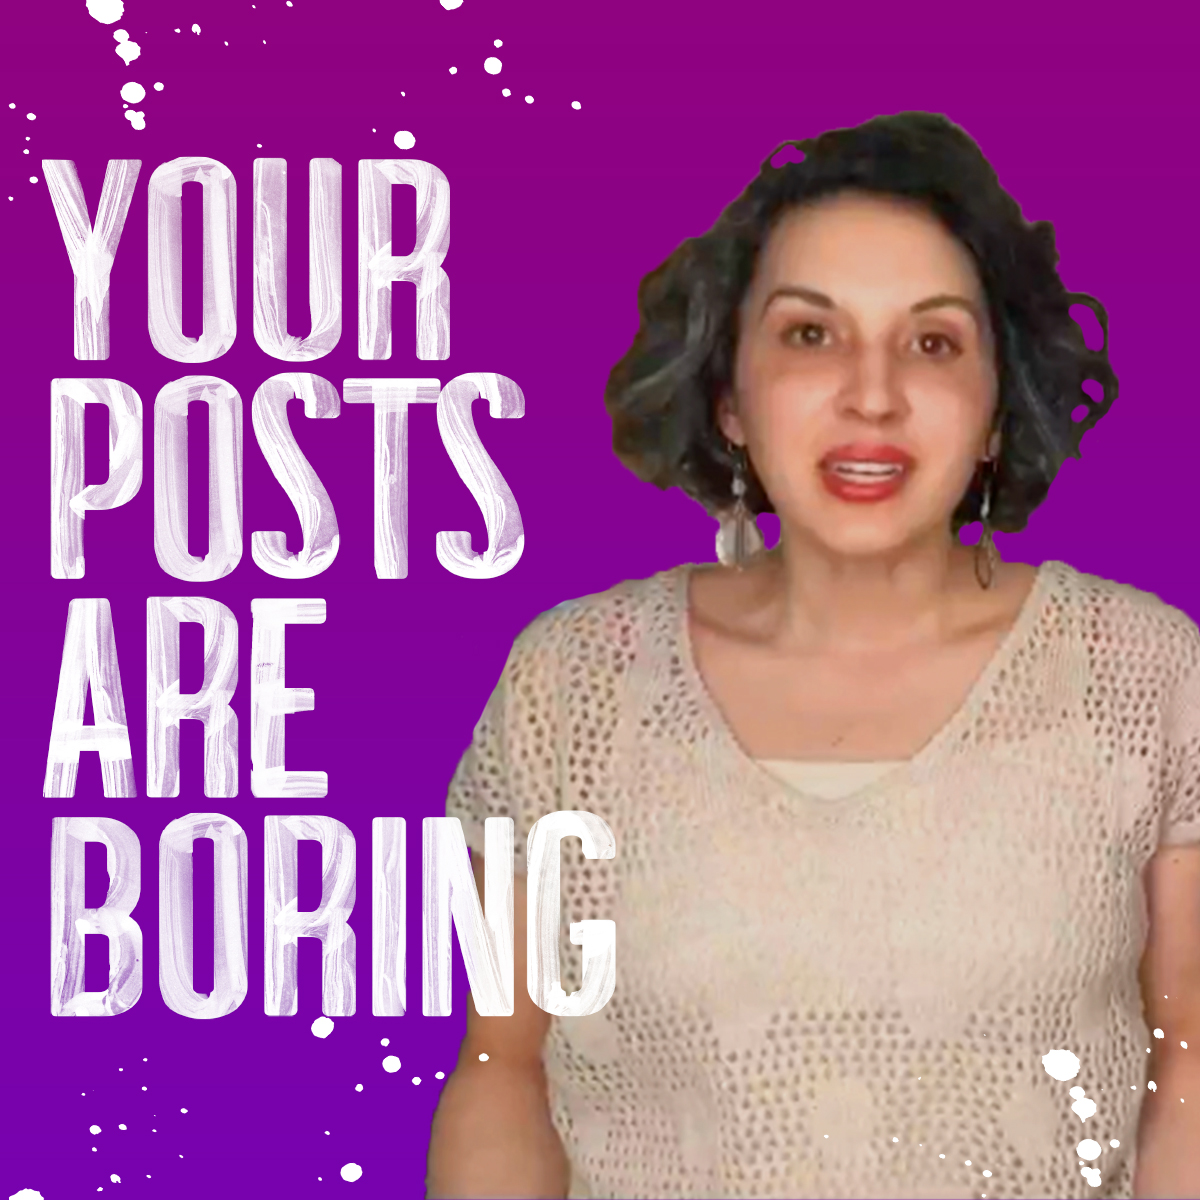 Your Posts Are Boring: Instagram Marketing Tips